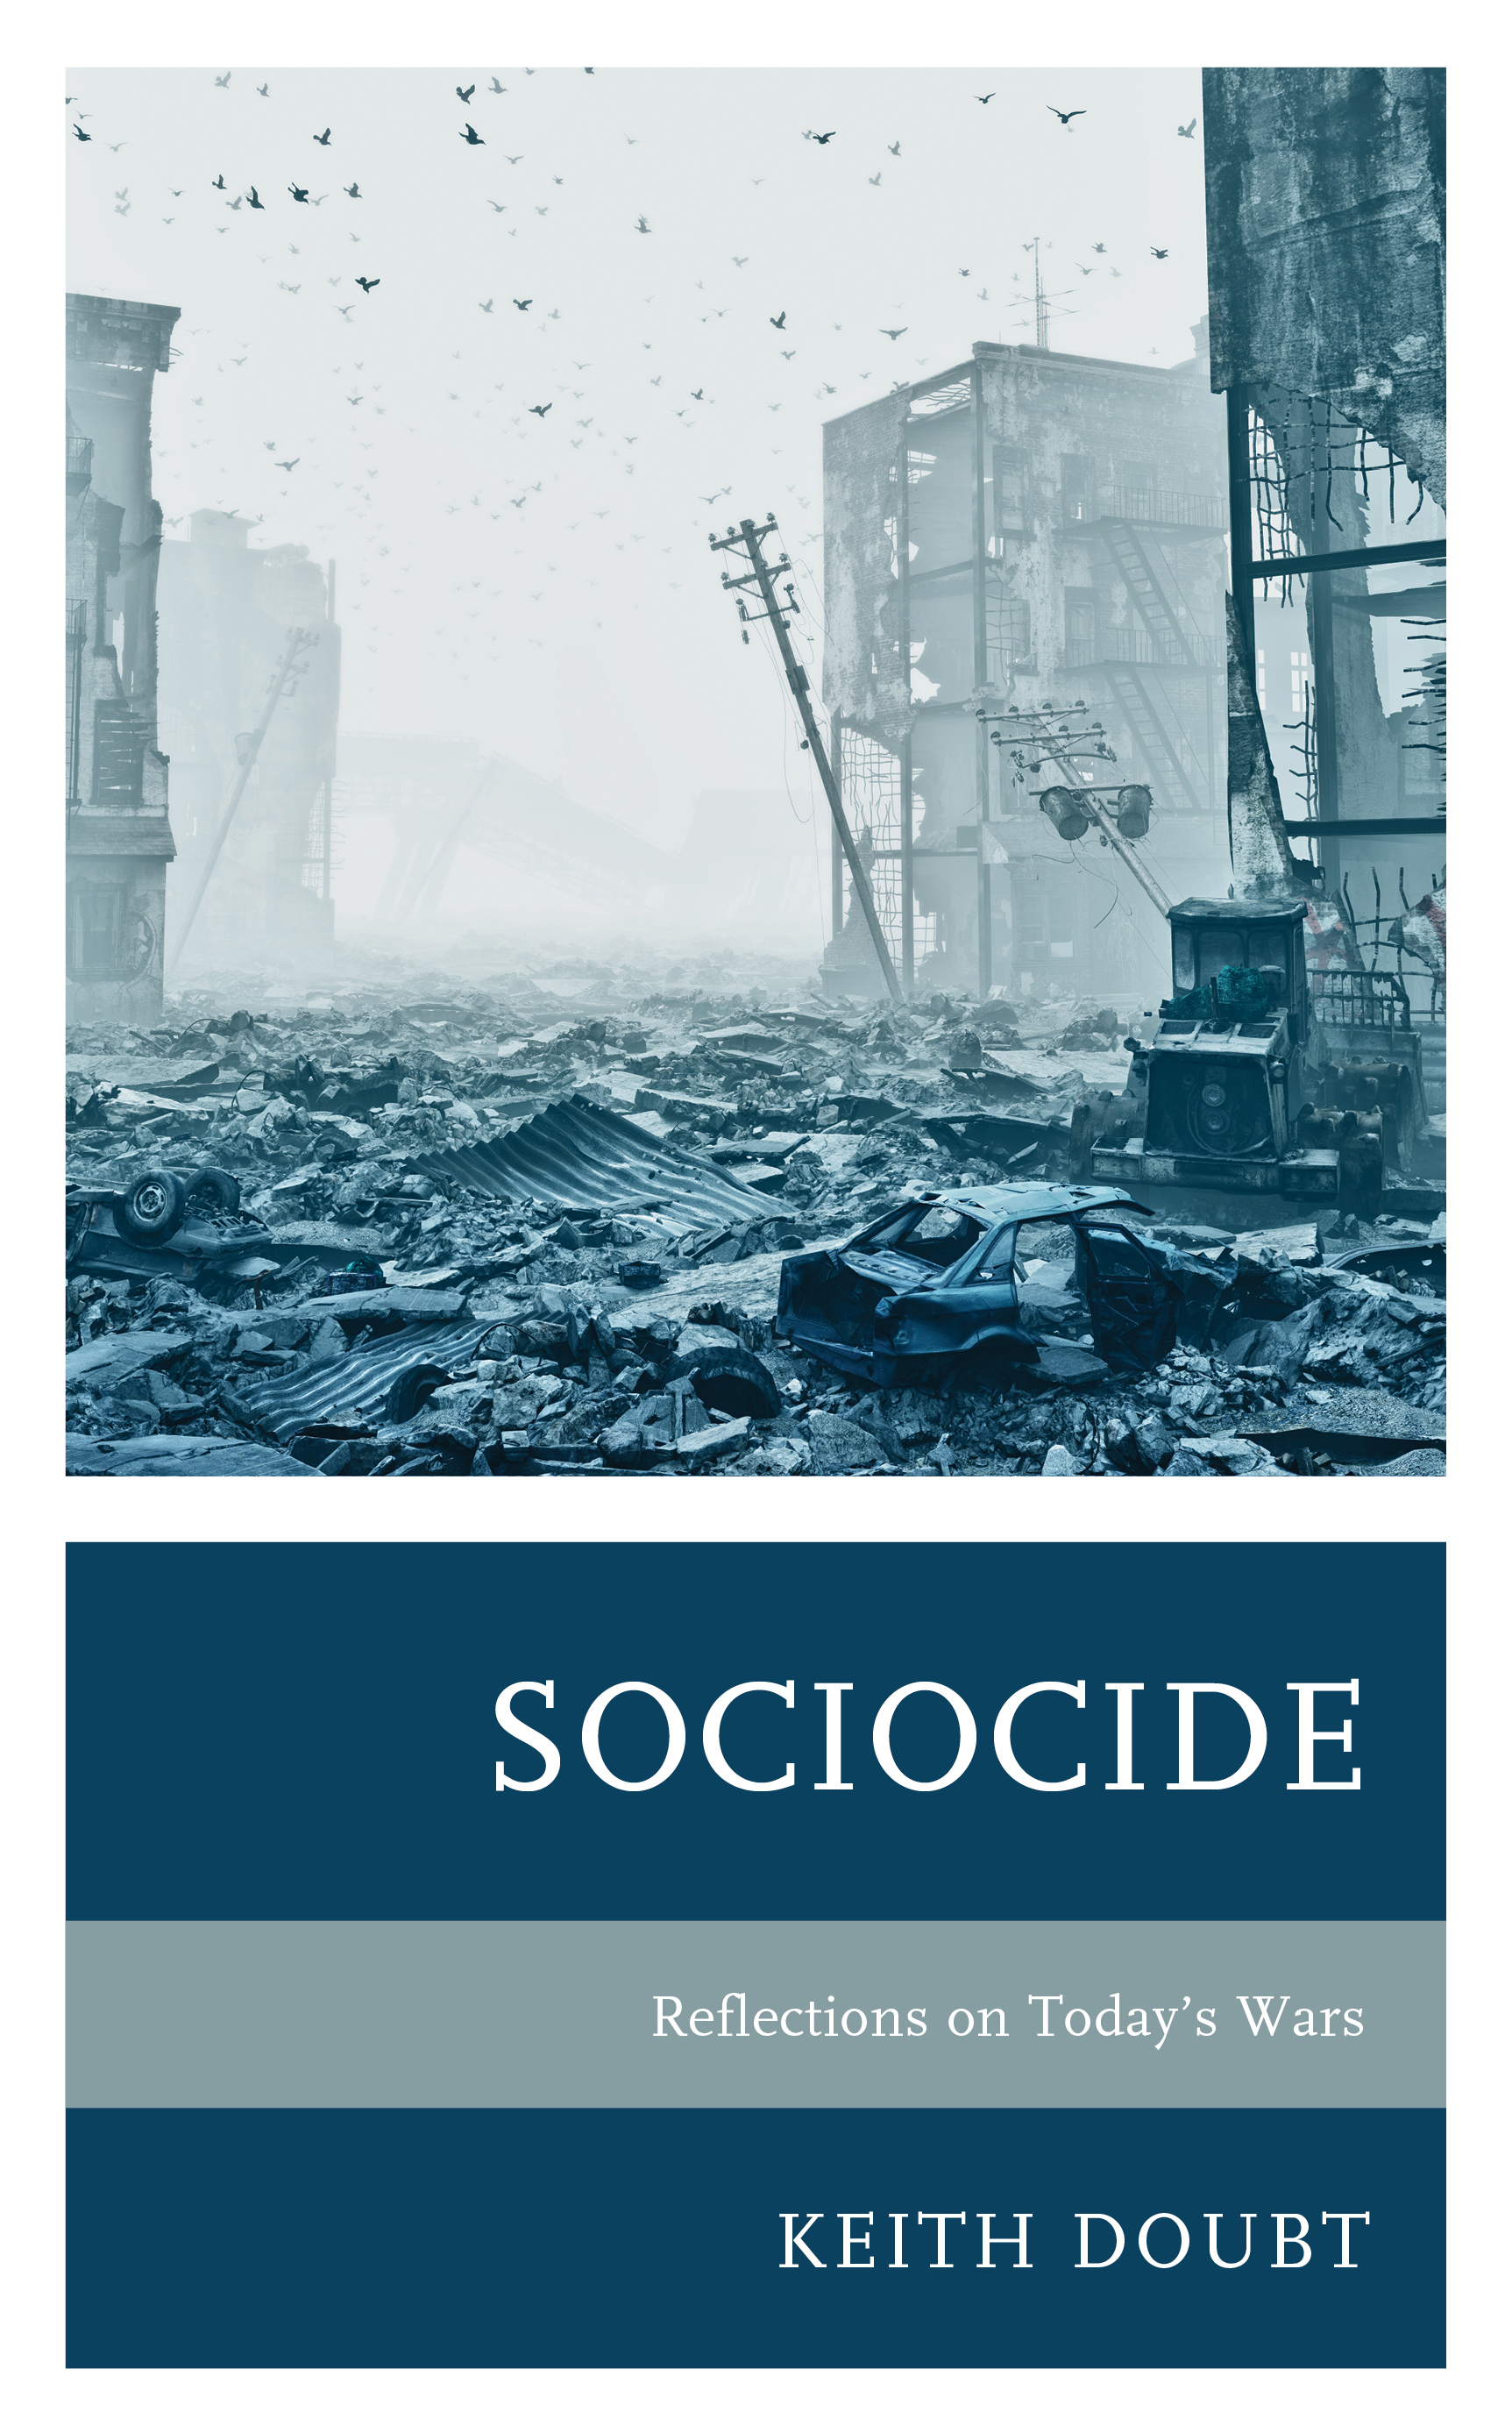 Sociocide: Reflections on Today’s Wars